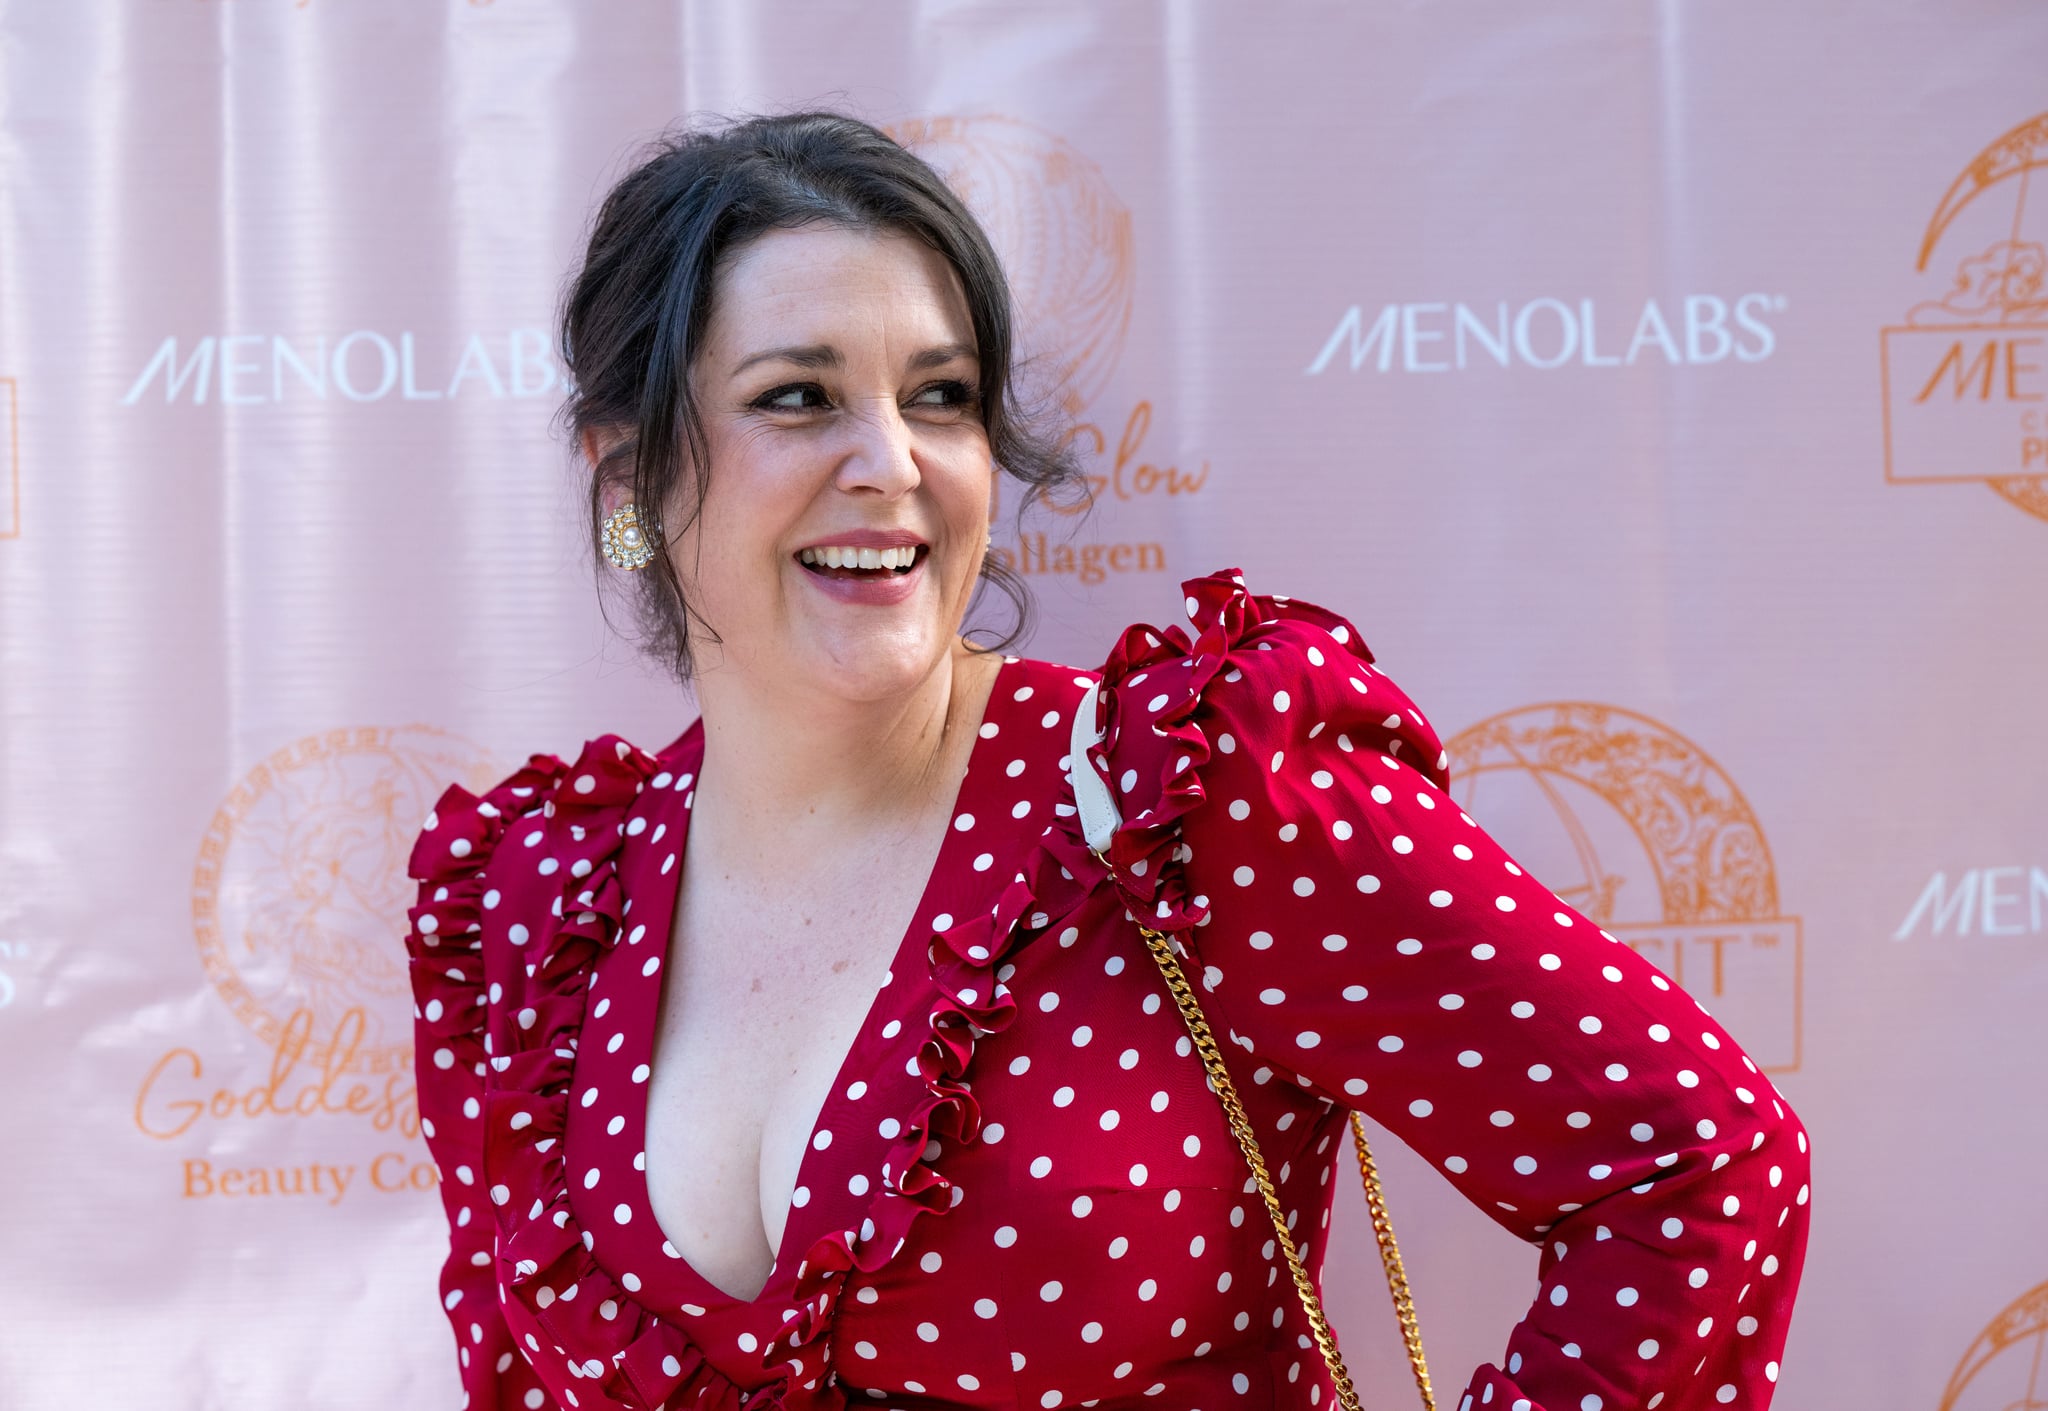 BEL AIR, CALIFORNIA - JULY 20: Actress Melanie Lynskey attends an exclusive screening of 